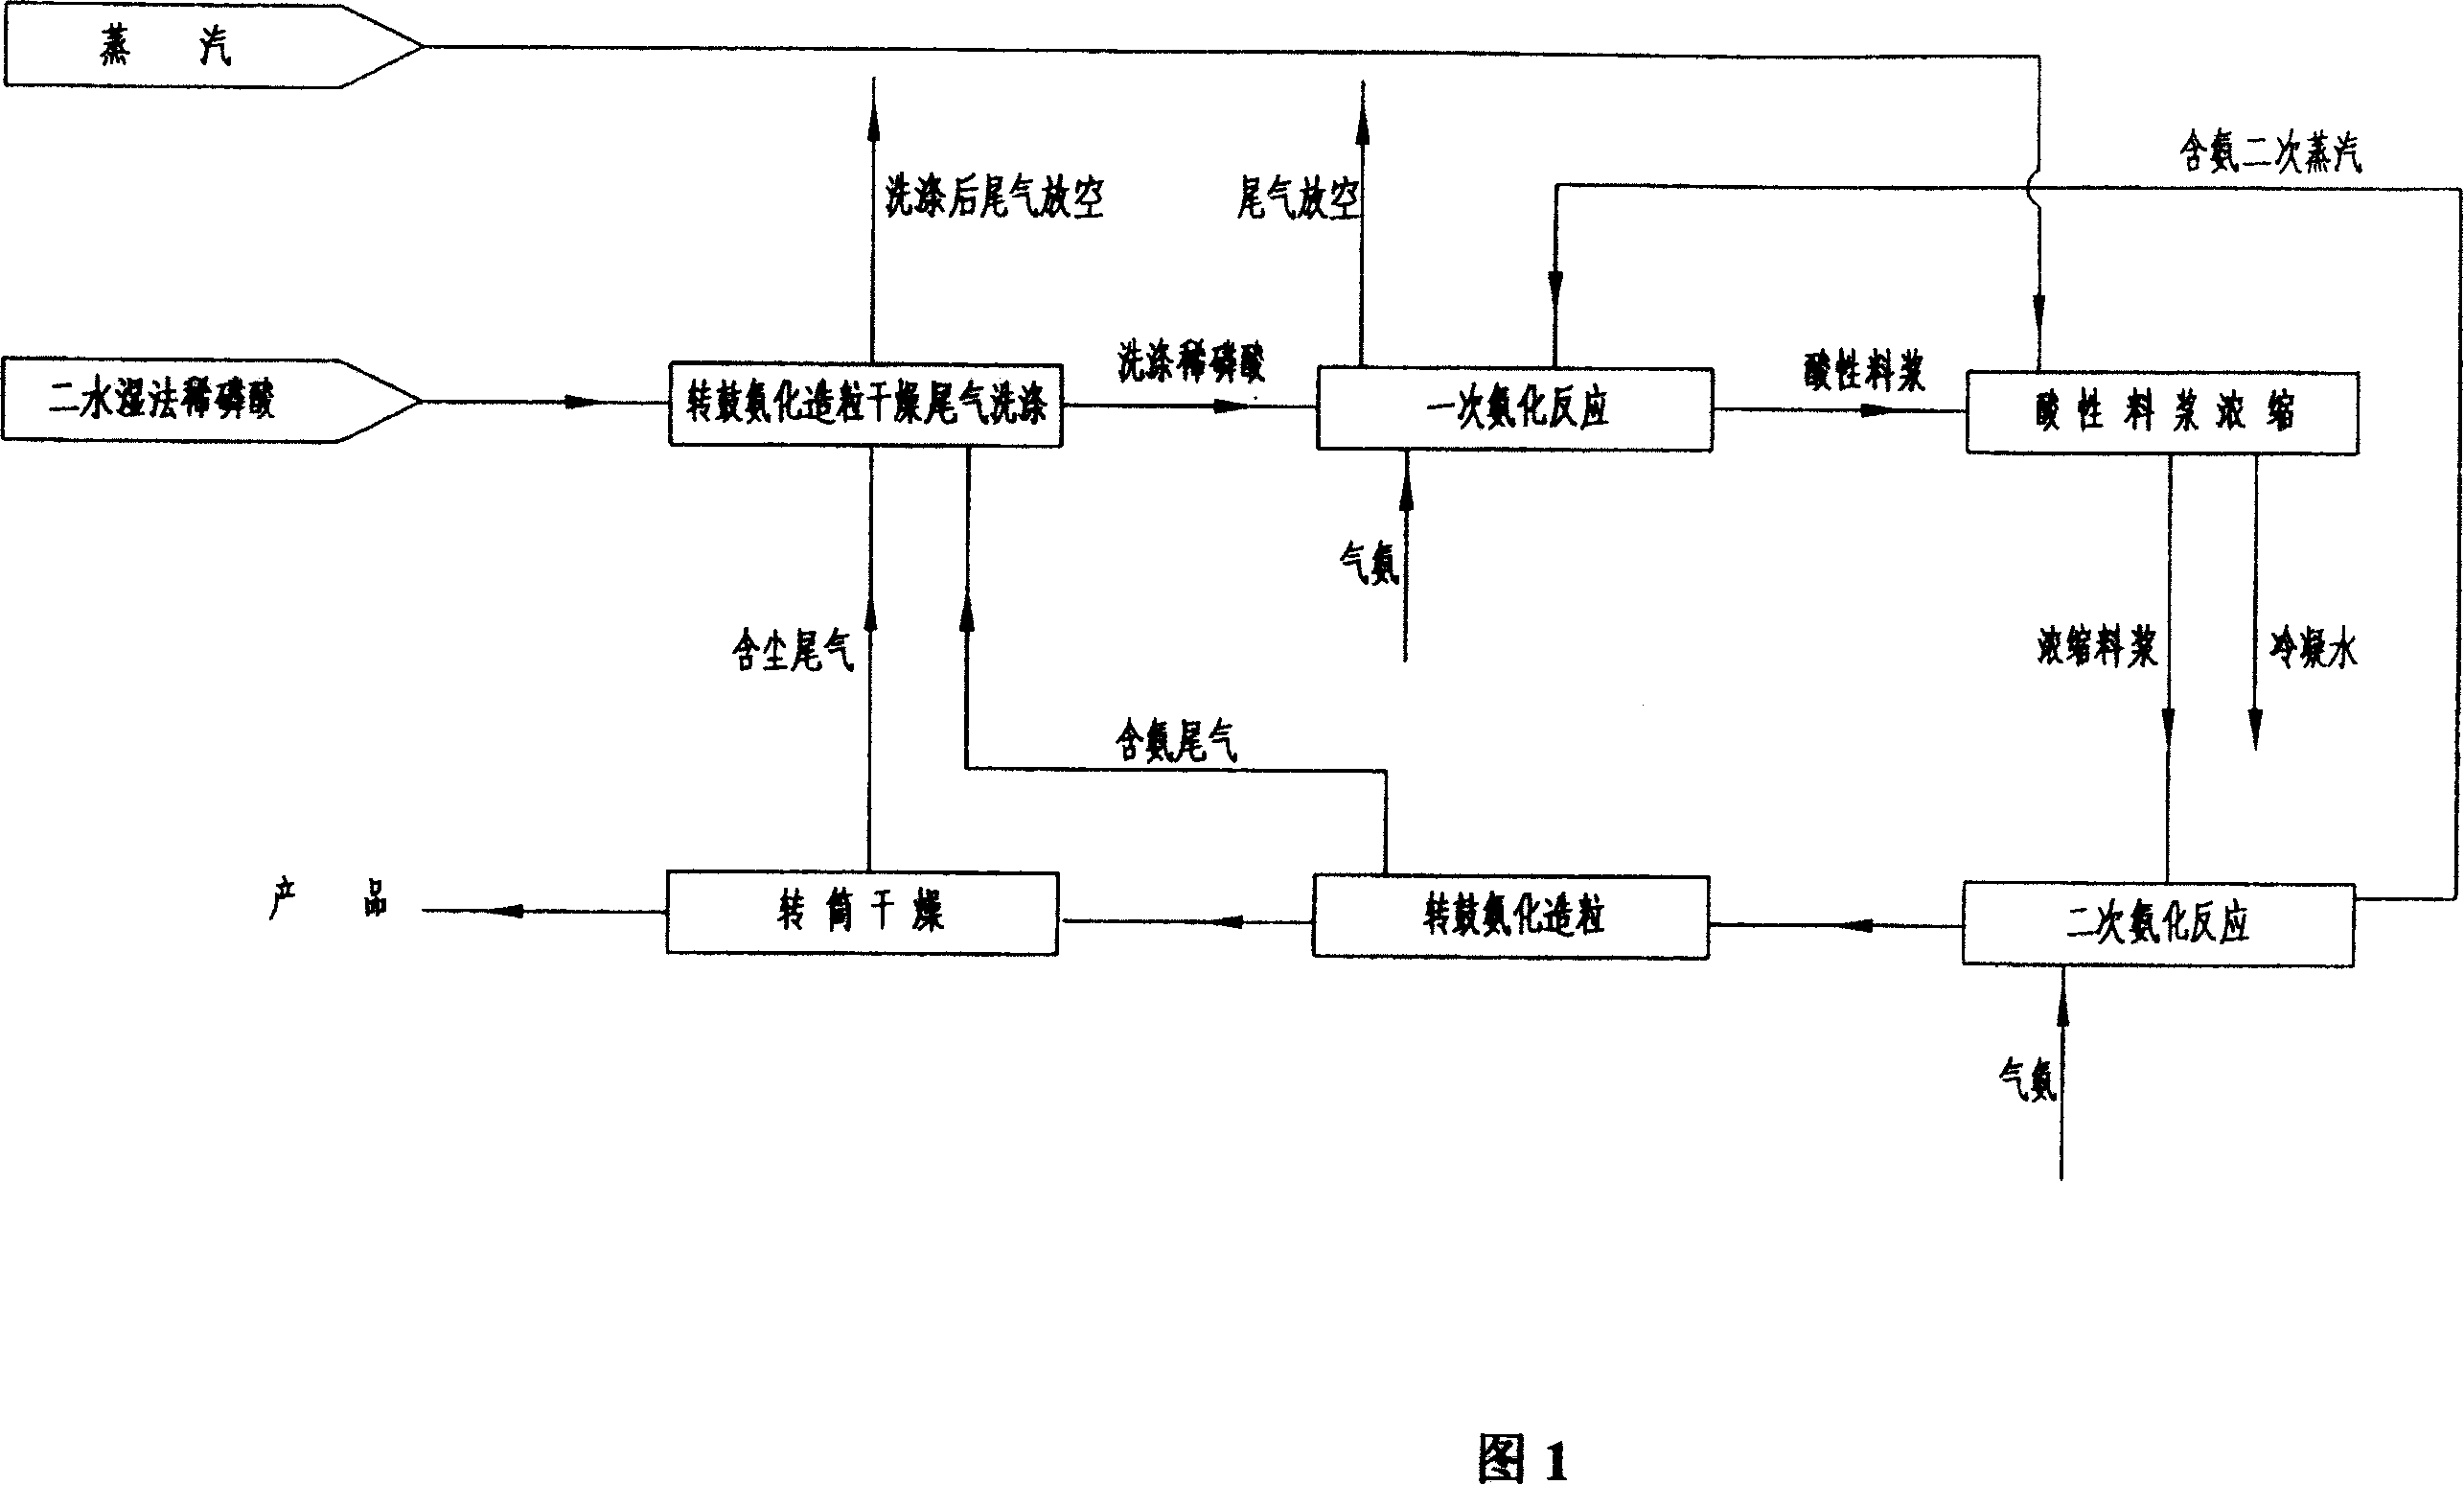 Method for producing diammonium phosphate by concentrating acid slime, and secondary ammoniation reactor